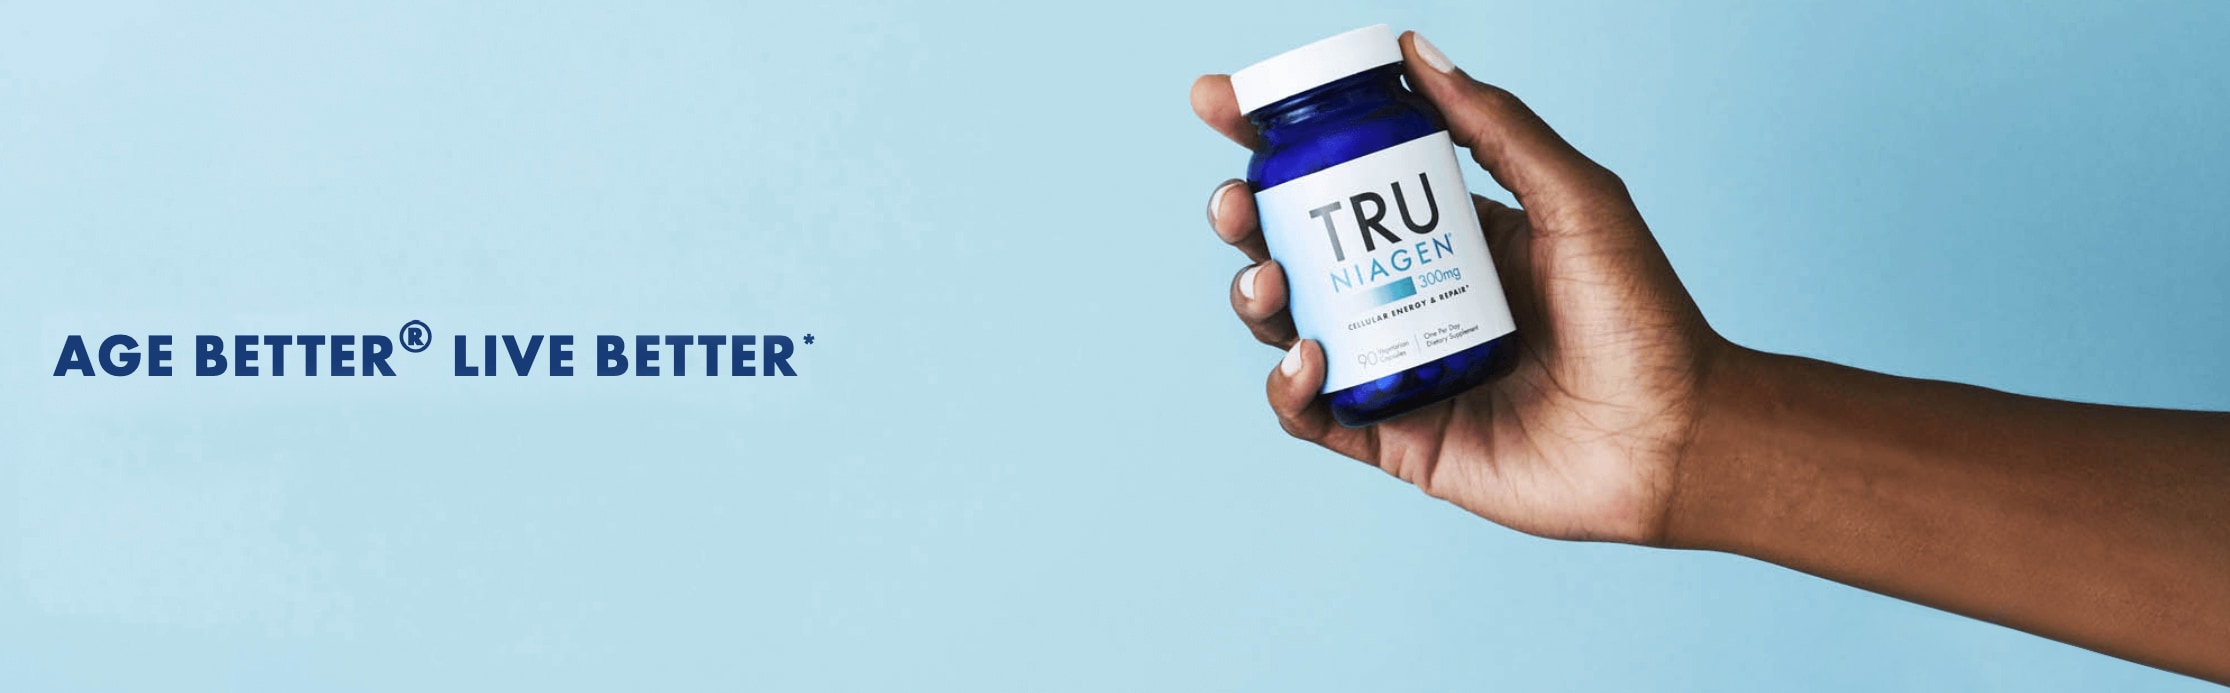 hand holding bottle of nutraceutical supplement with logo "age better live better"